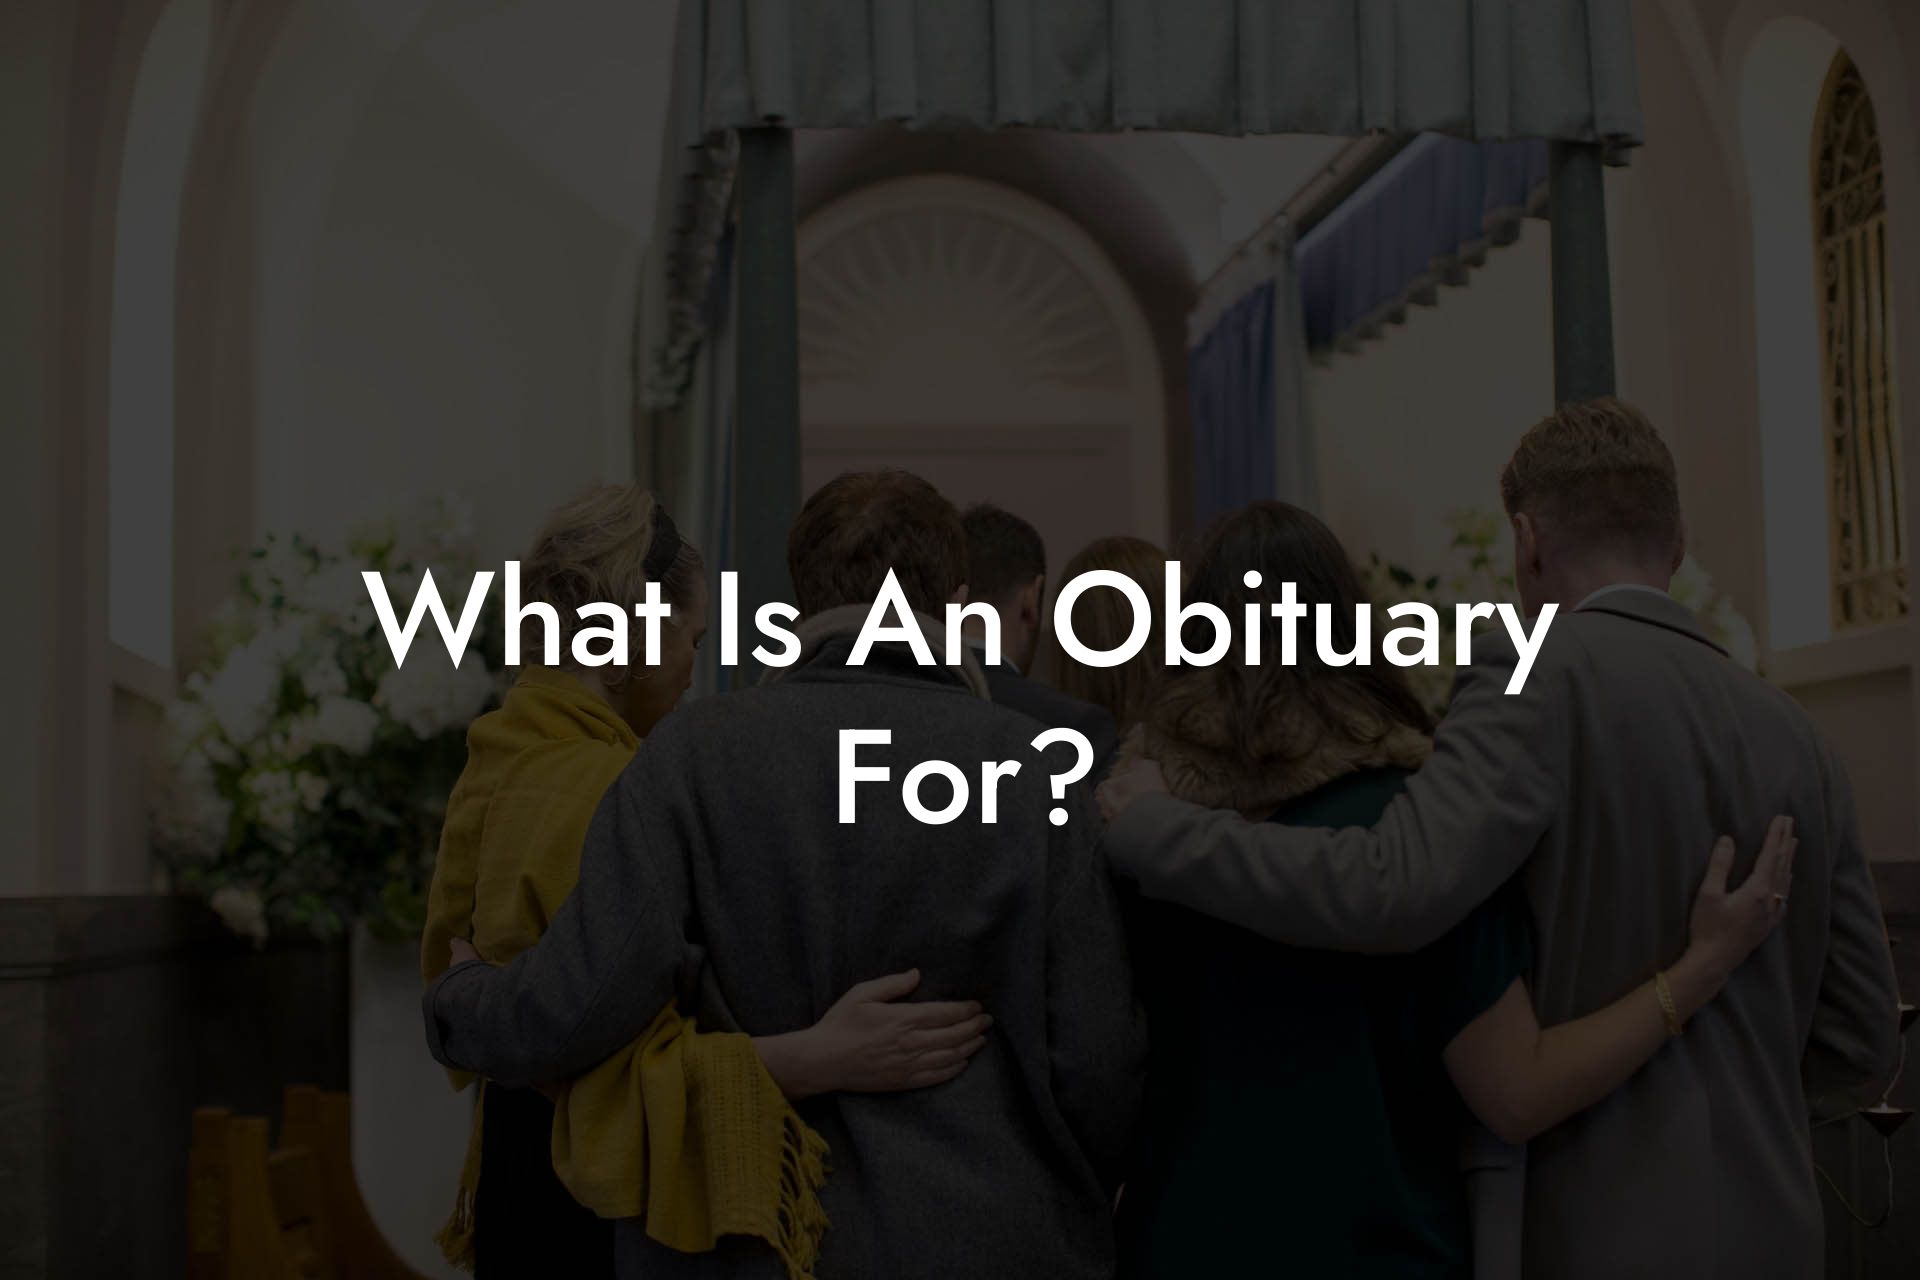 What Is An Obituary For?